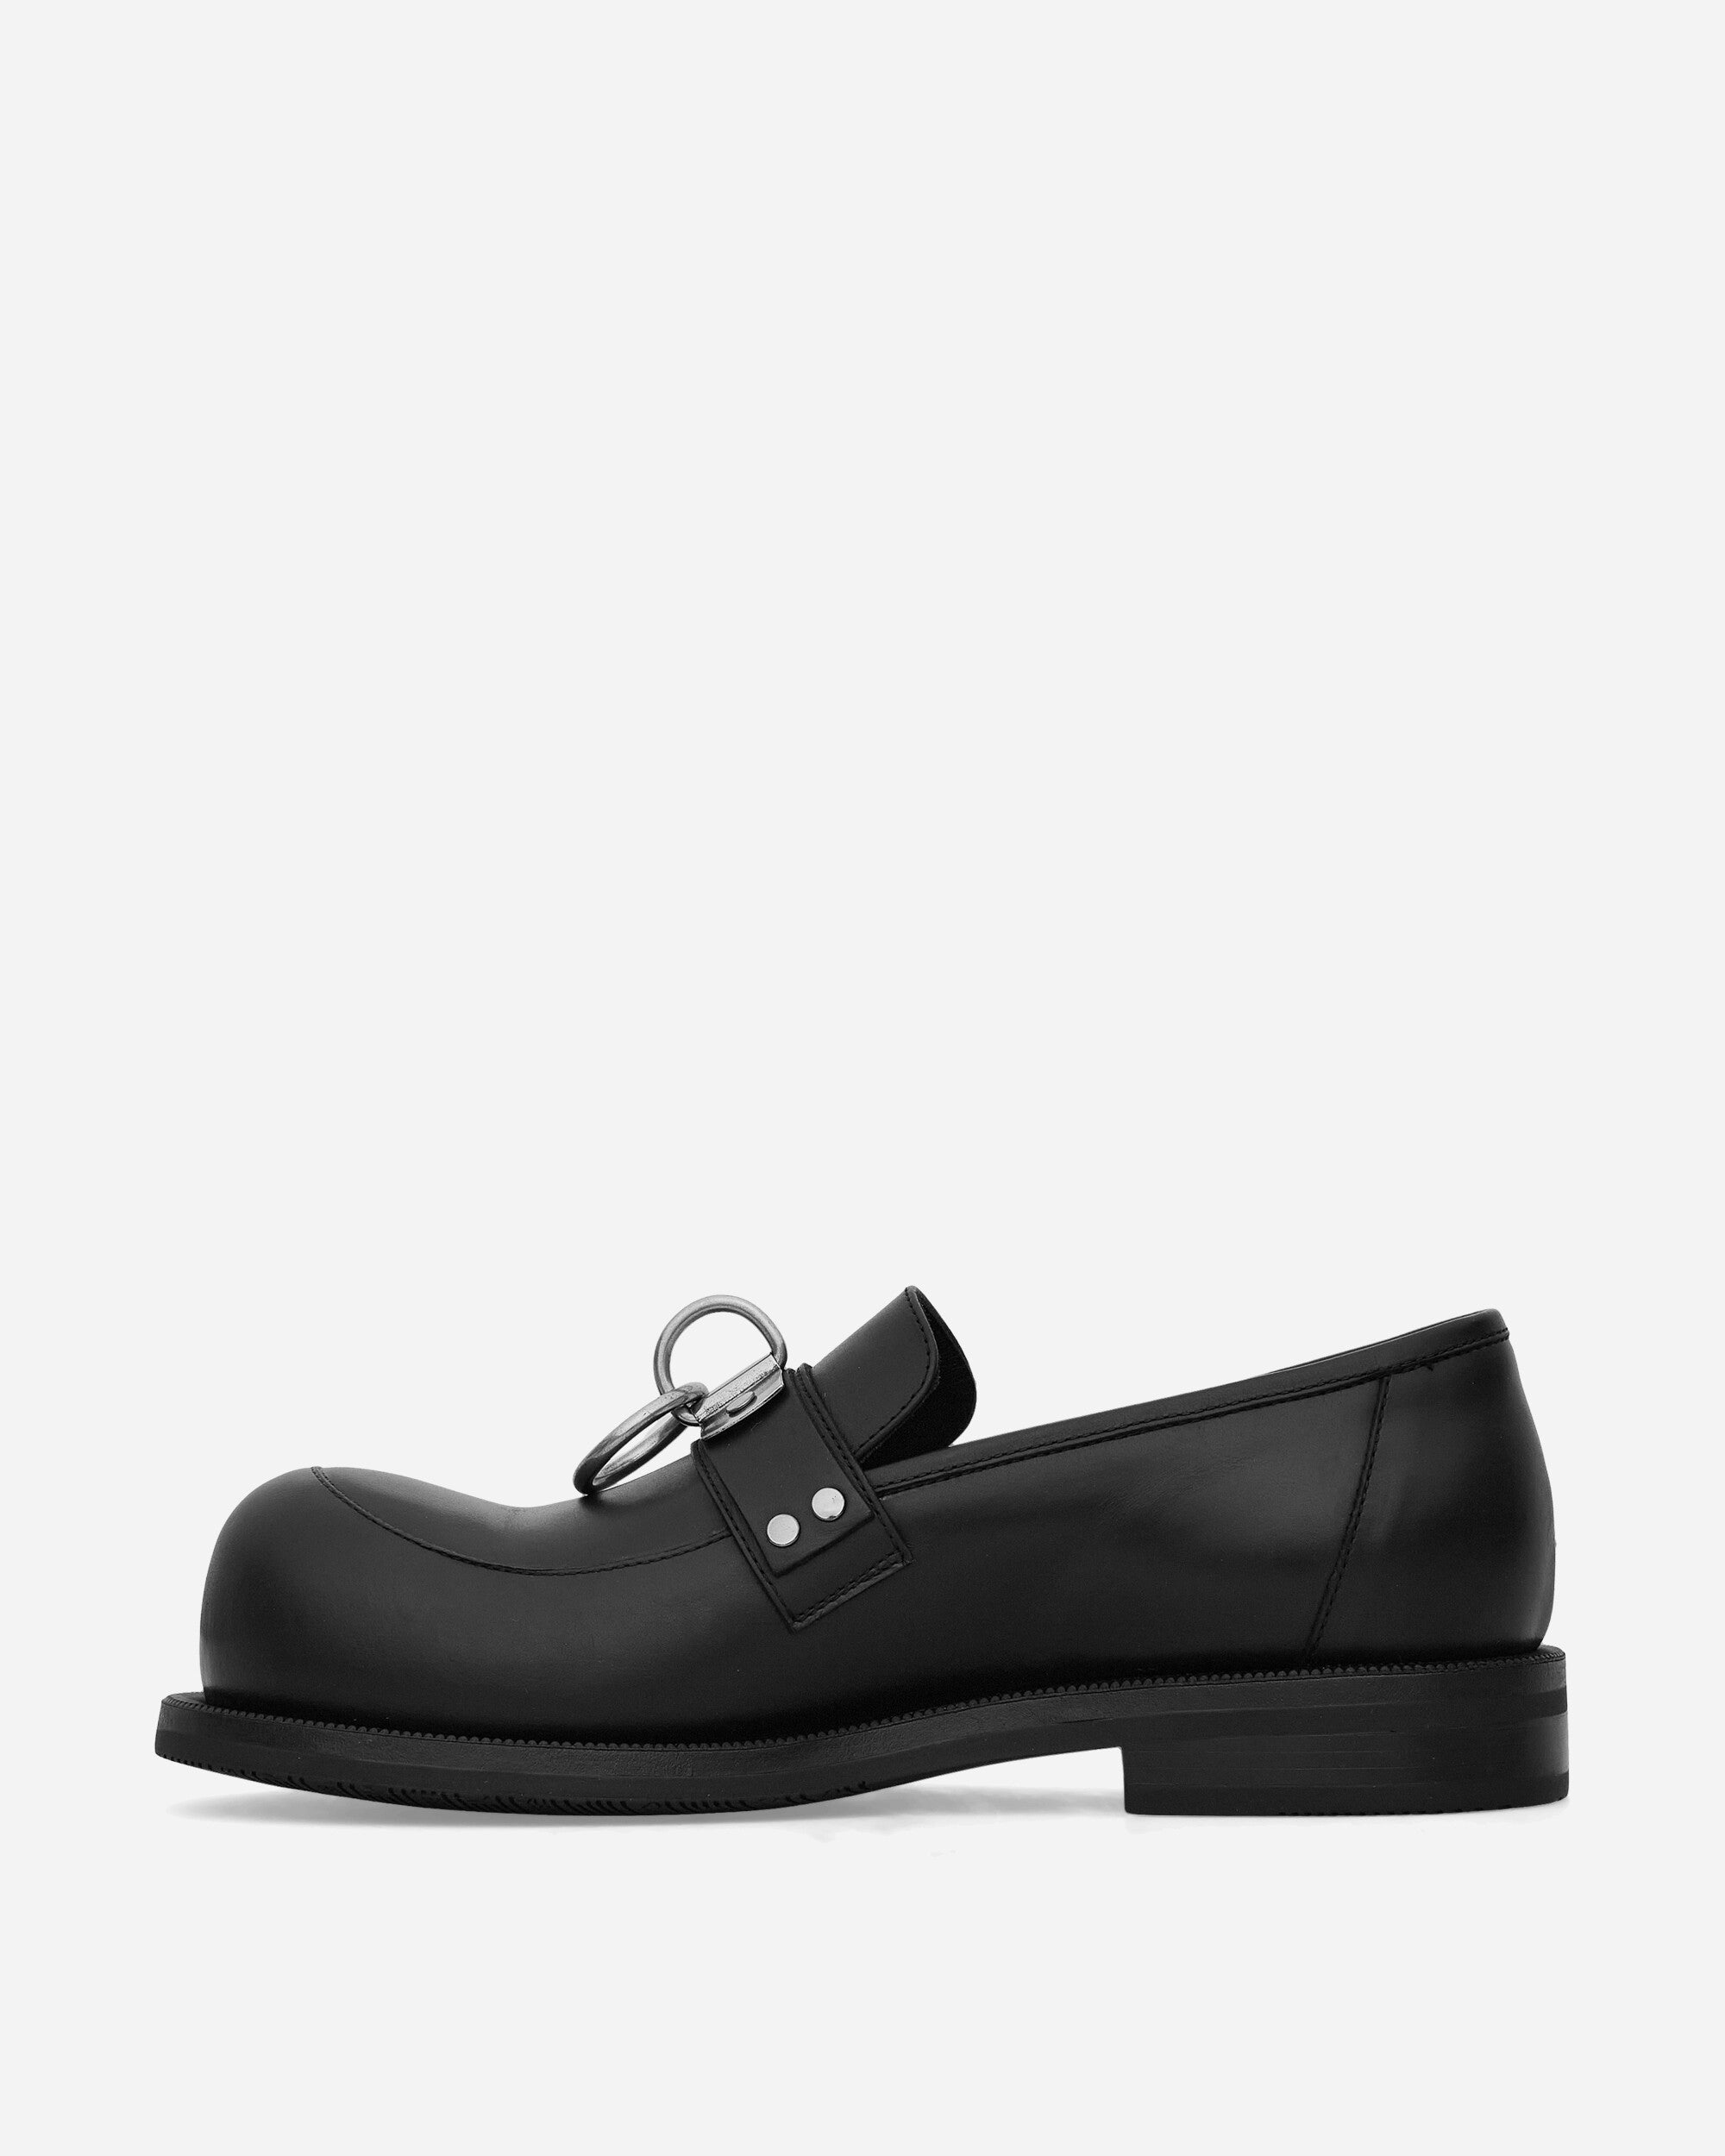 Martine Rose Bulb Toe Ring Loafer Black Classic Shoes Loafers MRSS24-1035 BLACK